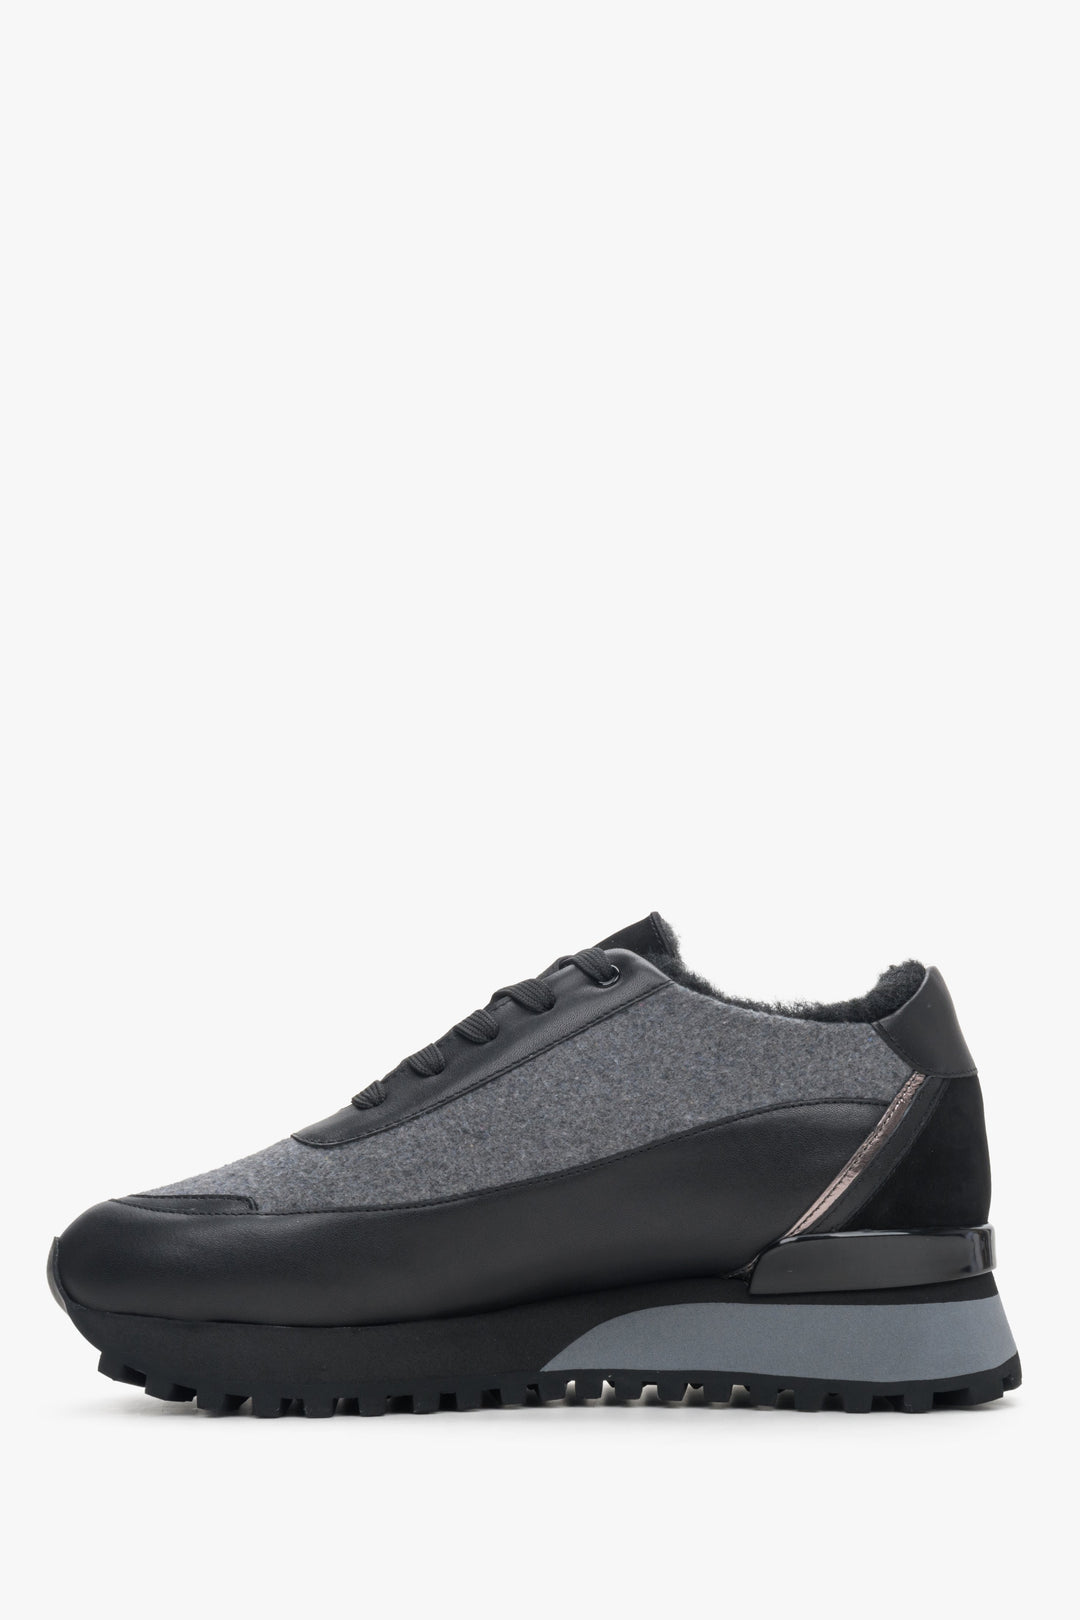 Women's black and grey winter sneakers made of mixed materials by Estro - side view of the shoe.